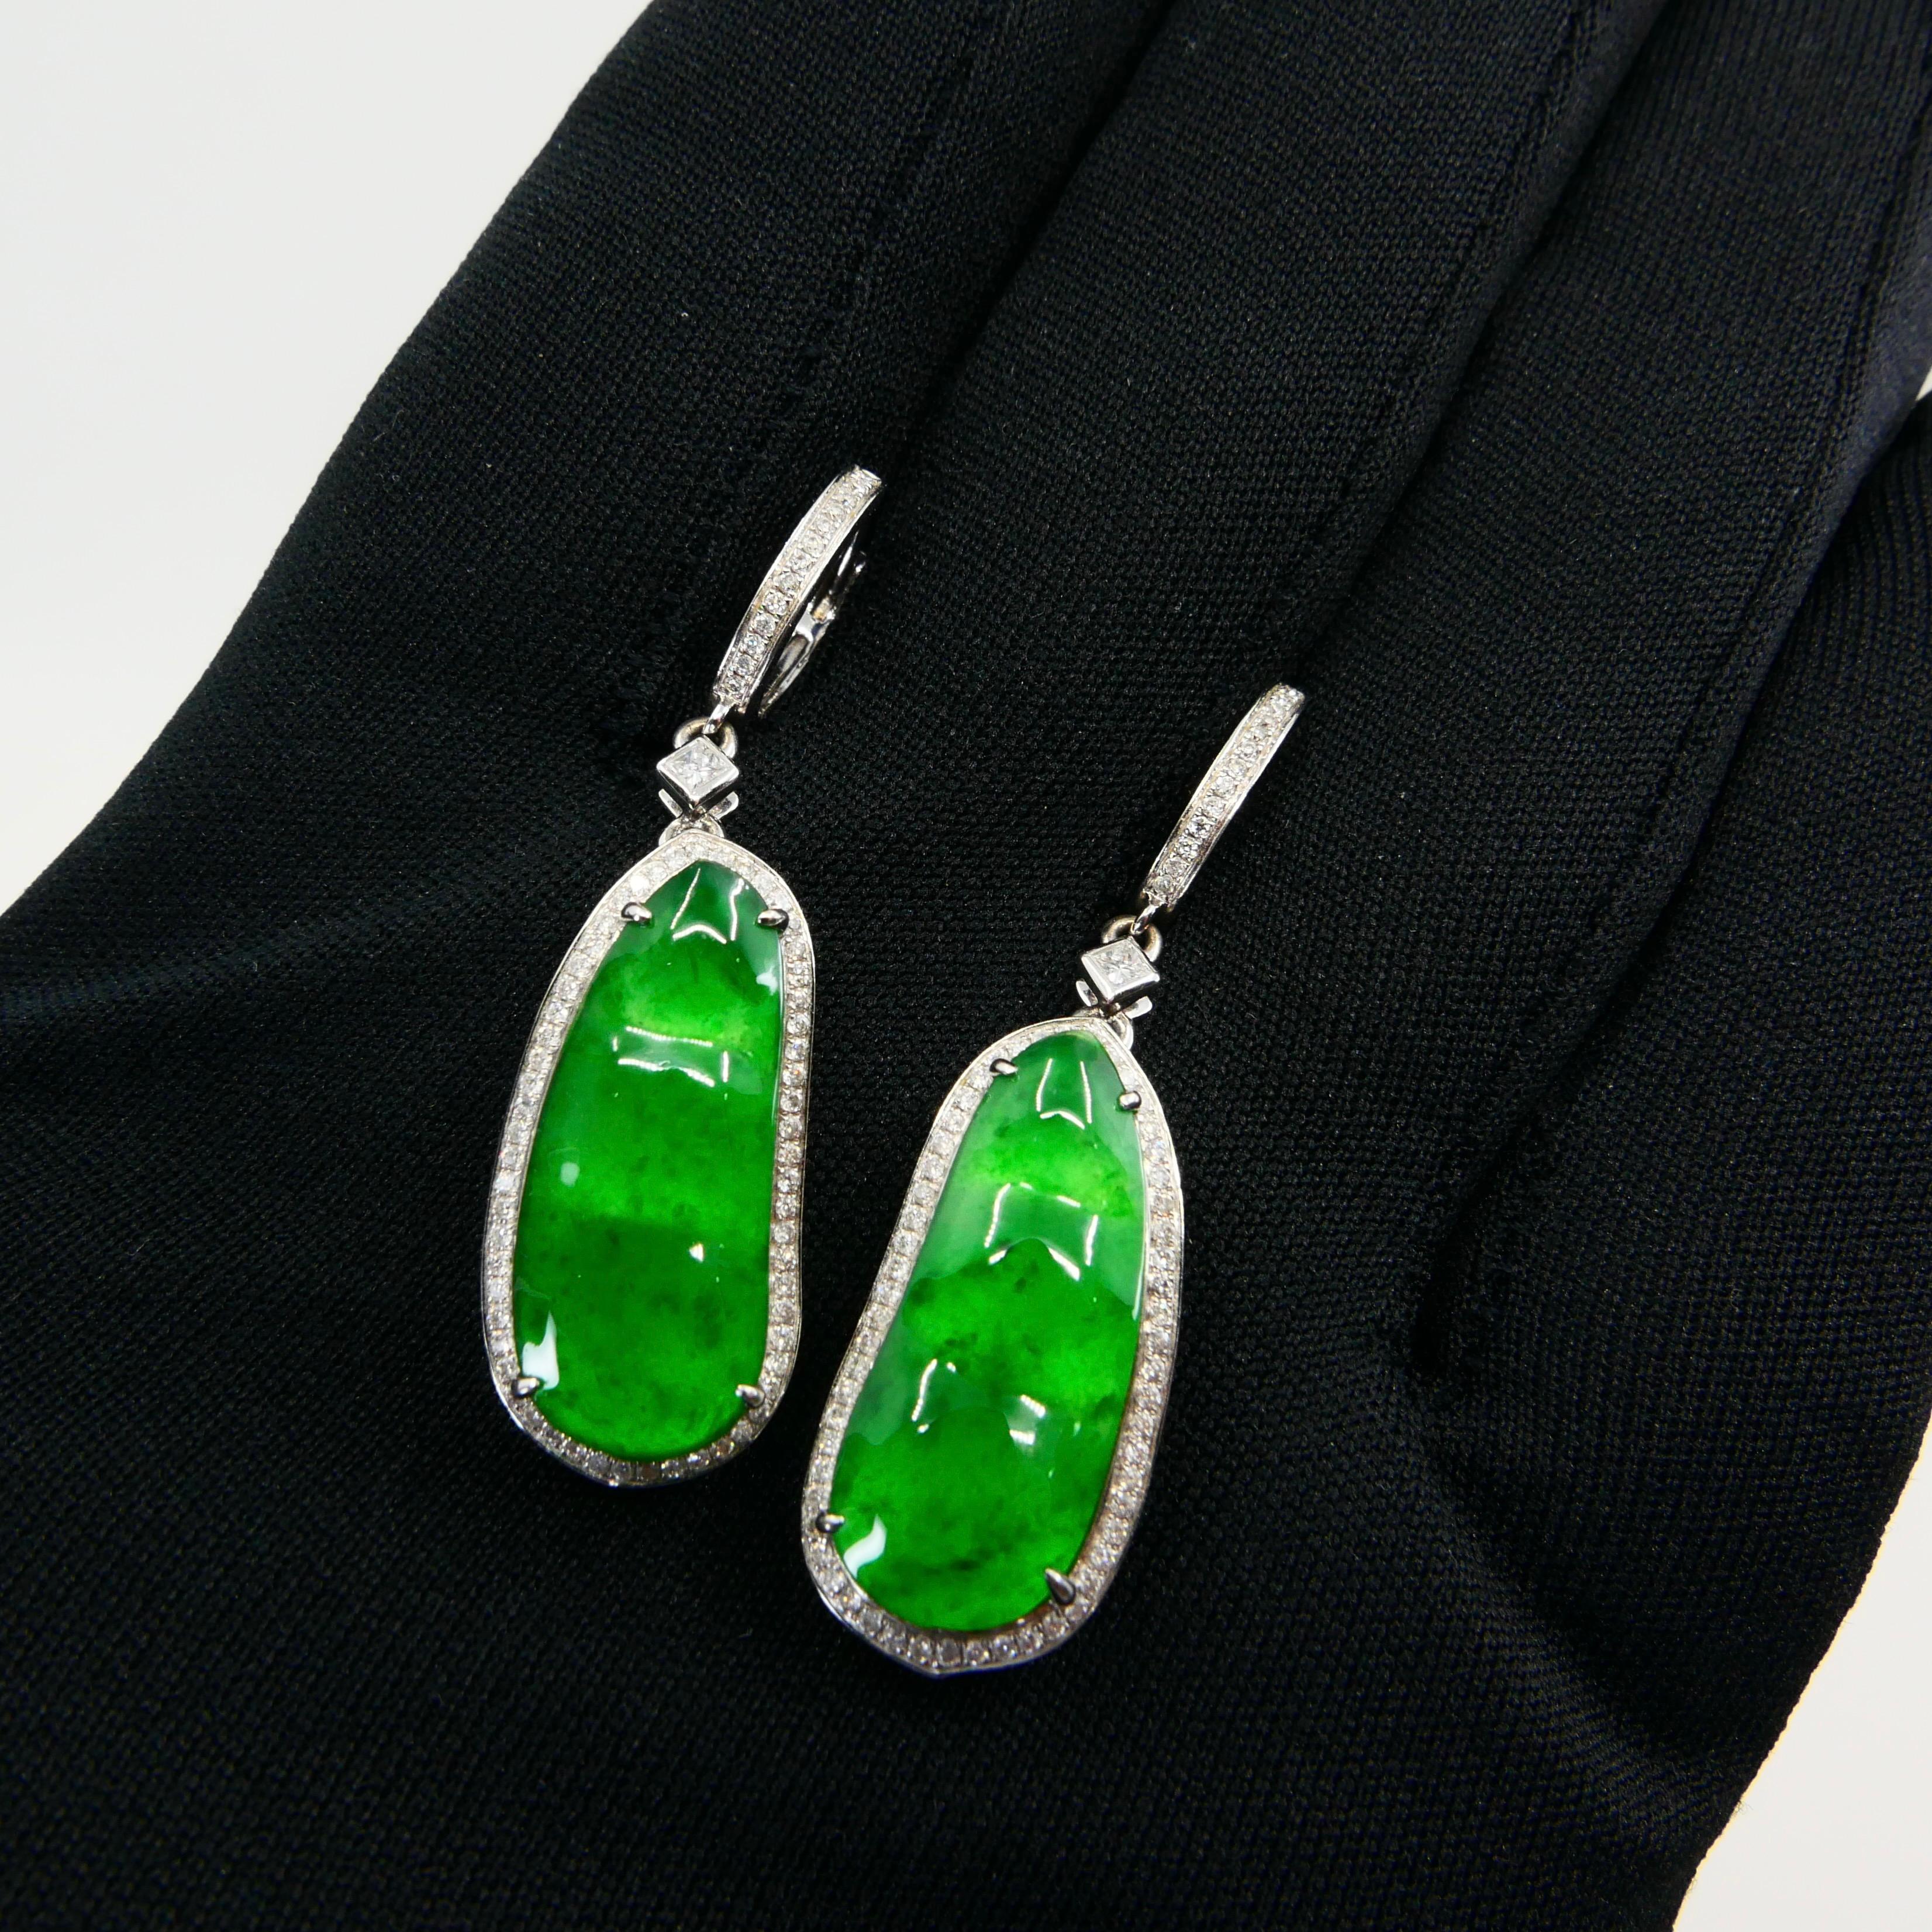 Certified Natural Type A Icy Jade Peapod Diamond Earrings, Glowing Apple Green For Sale 4